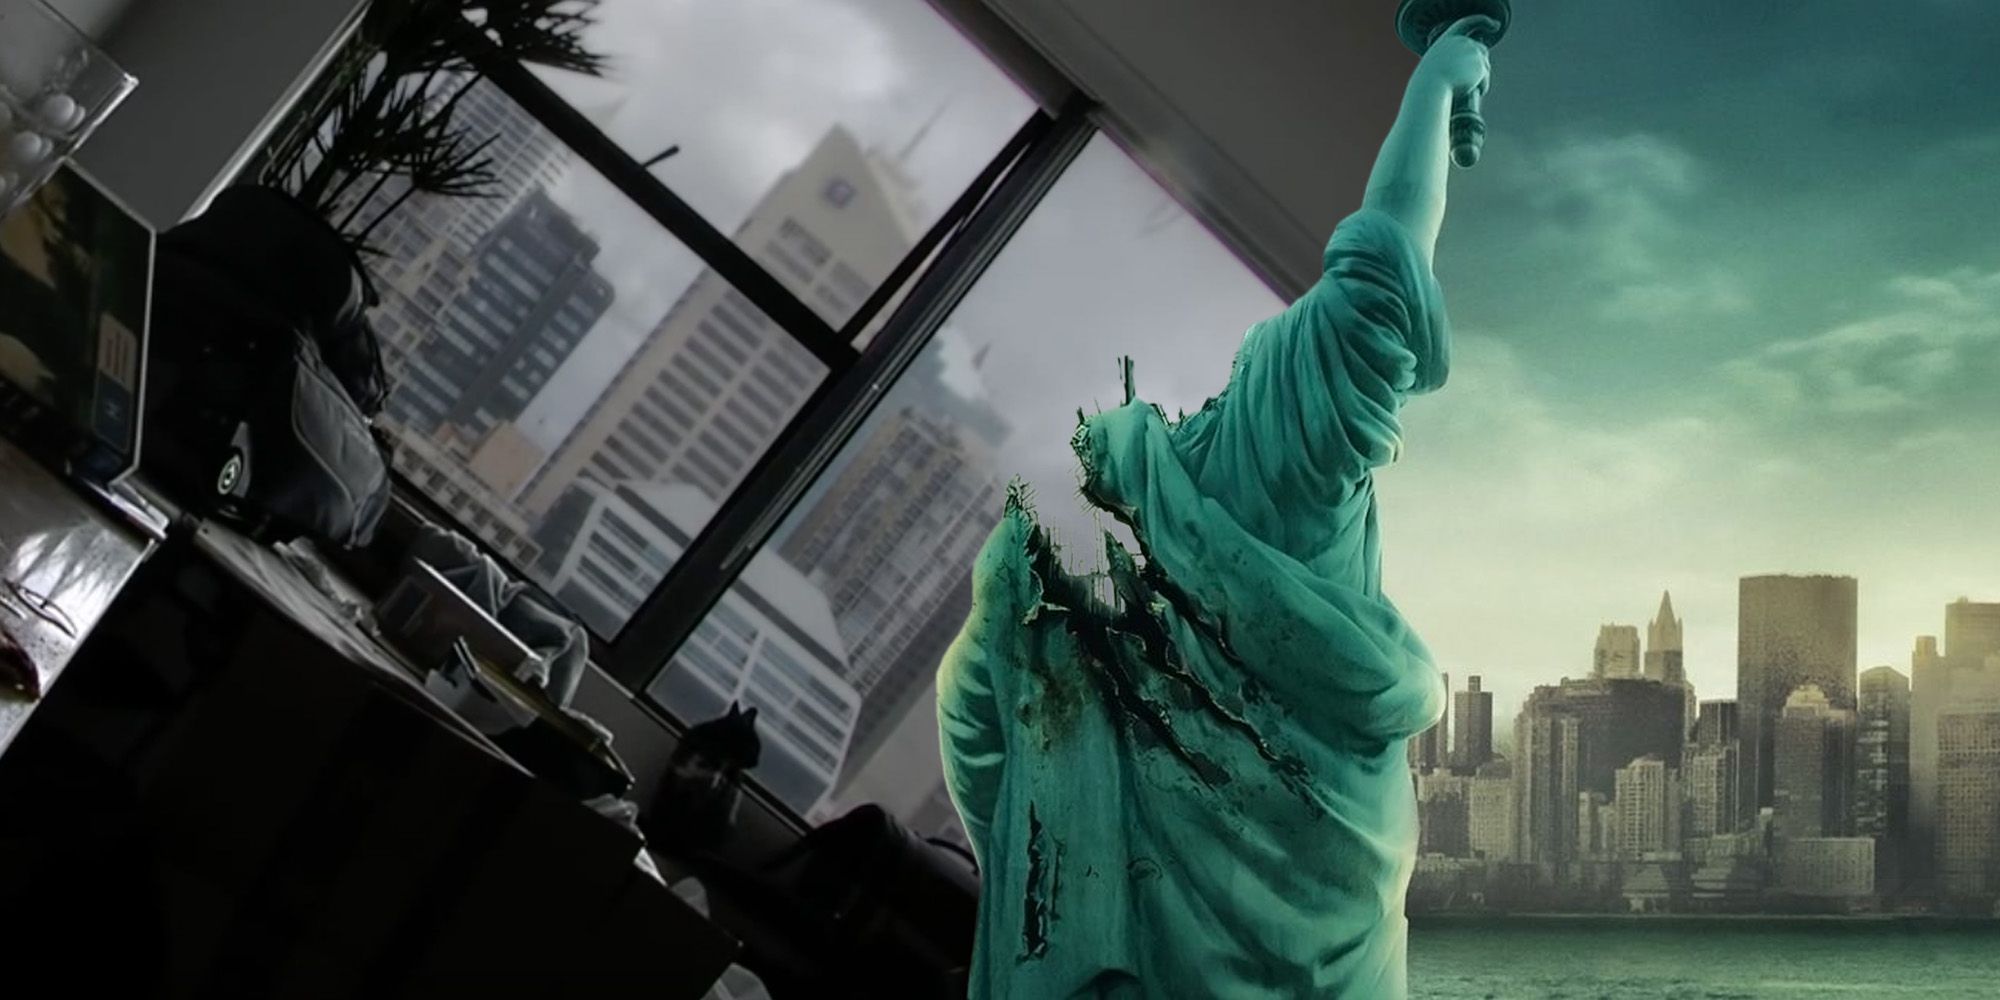 Cloverfield 2 Should Expand On The Original Marketing Campaign